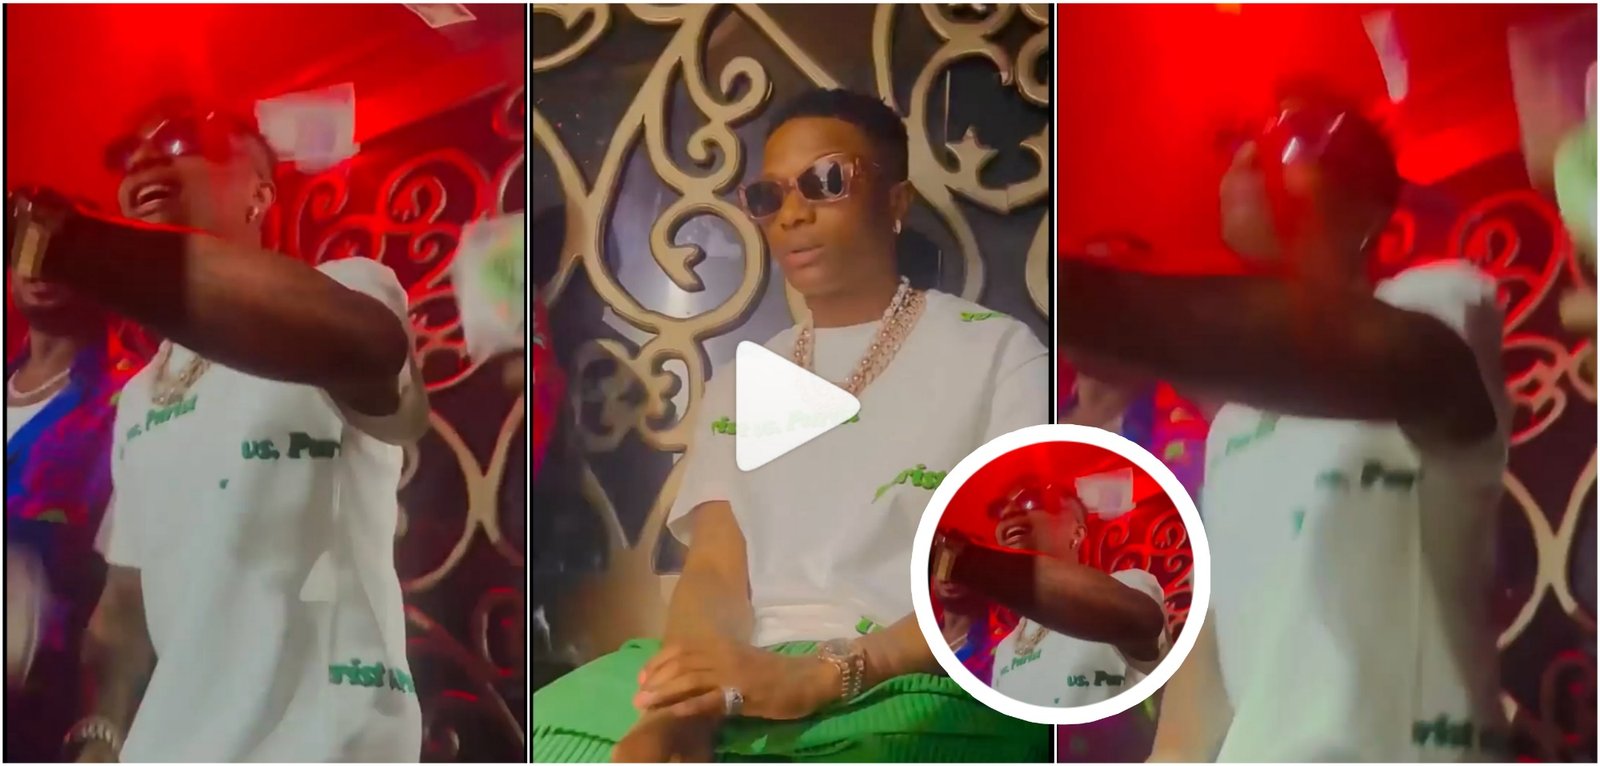 “Big Wiz in Big Mood” – Wizkid captured as he cools himself down during a hard party (WATCH)